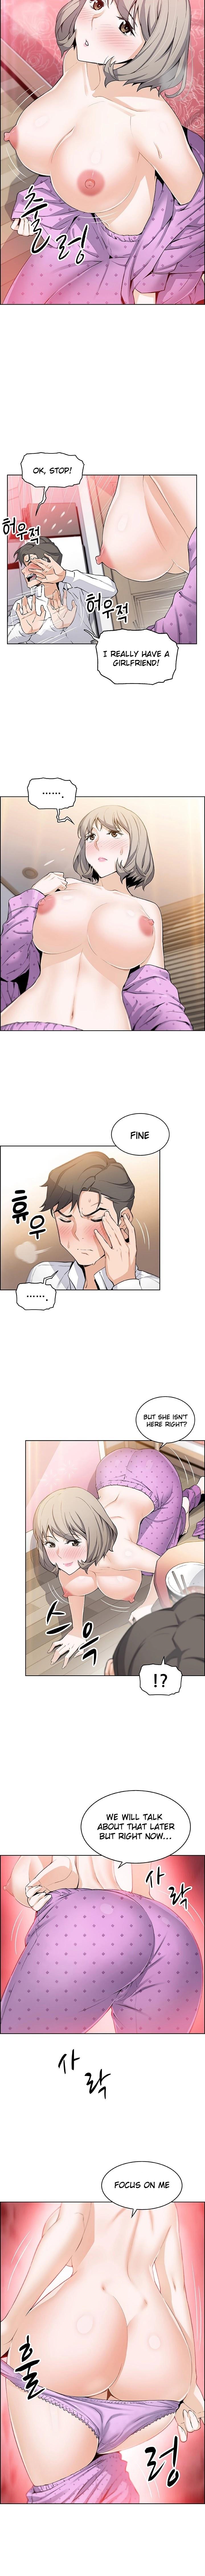 Housekeeper [Neck Pillow, Paper] Ch.49/49 [English] [Manhwa PDF] Completed 171